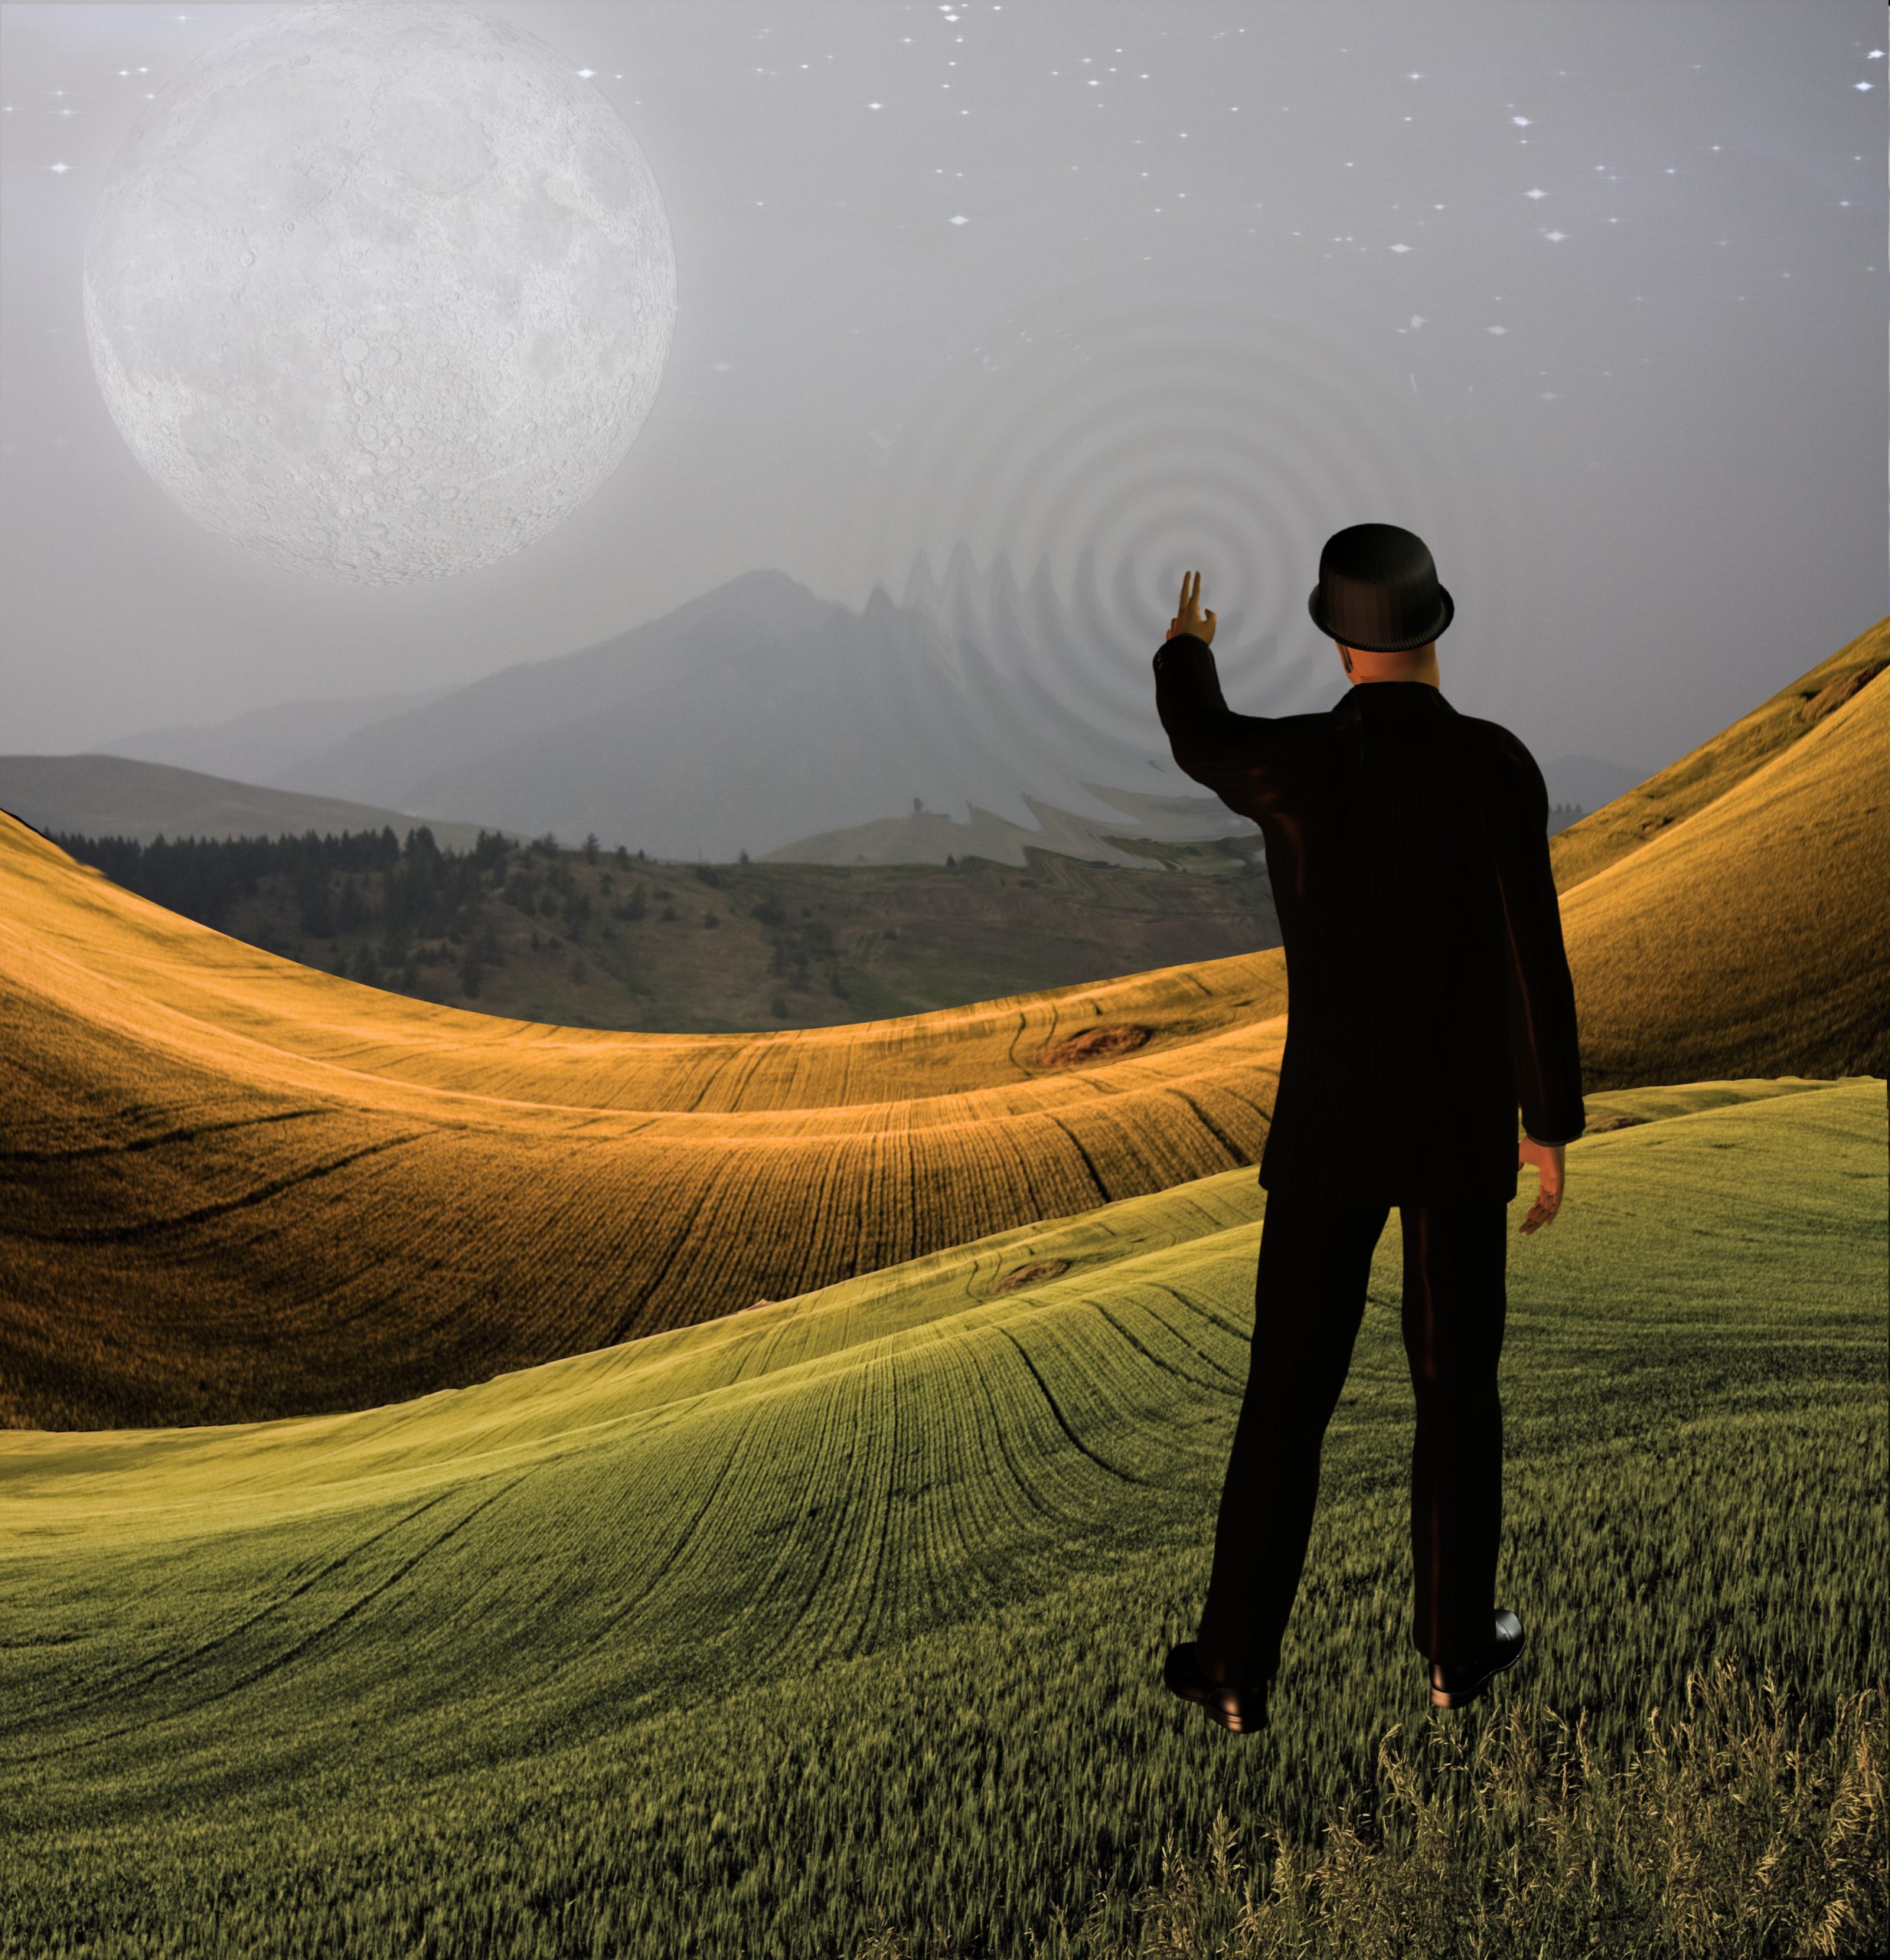 Man touches sky in landscape creting ripples in the scene